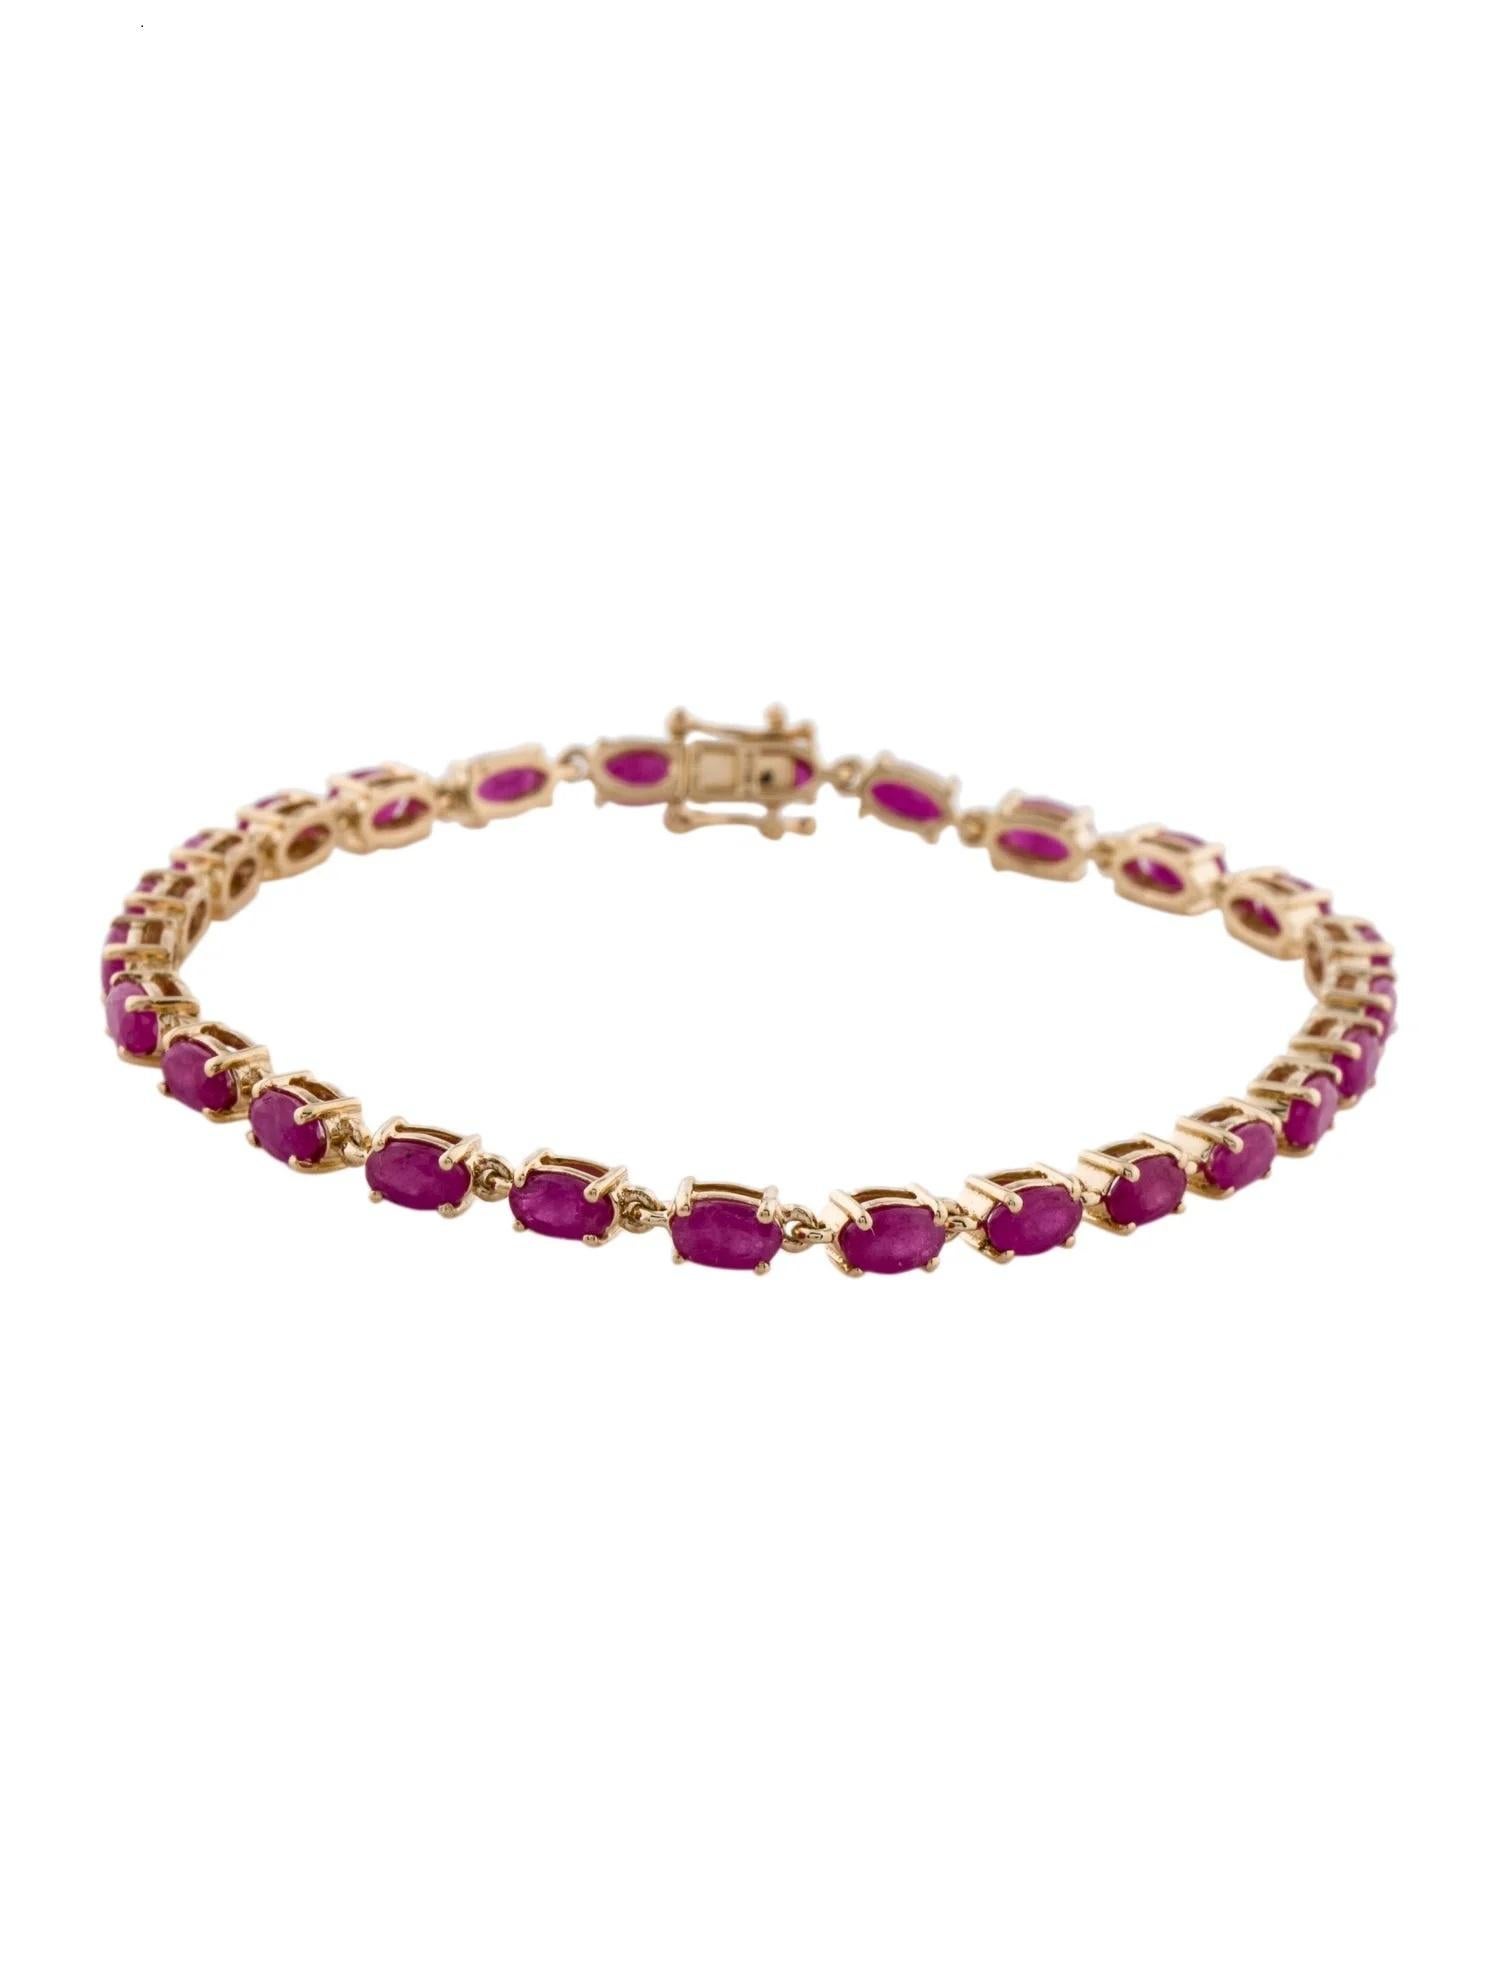 Oval Cut 14K Yellow Gold Ruby Link Bracelet, 8.58ctw Oval Brilliant Red Stones For Sale